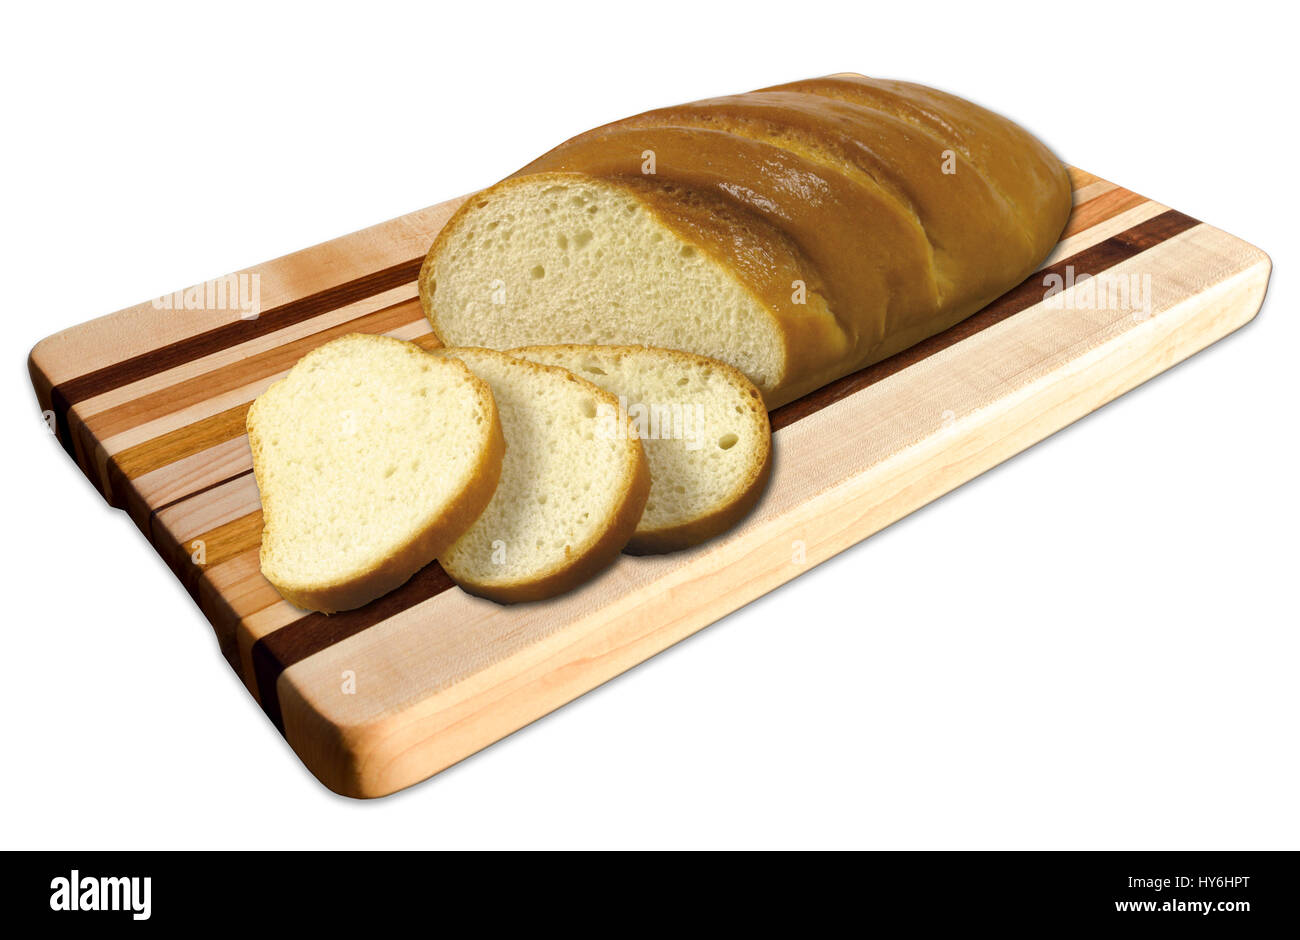 Fresh golden brown crispy baked bread sliced on a bread Board, isolated against a white background. Stock Photo